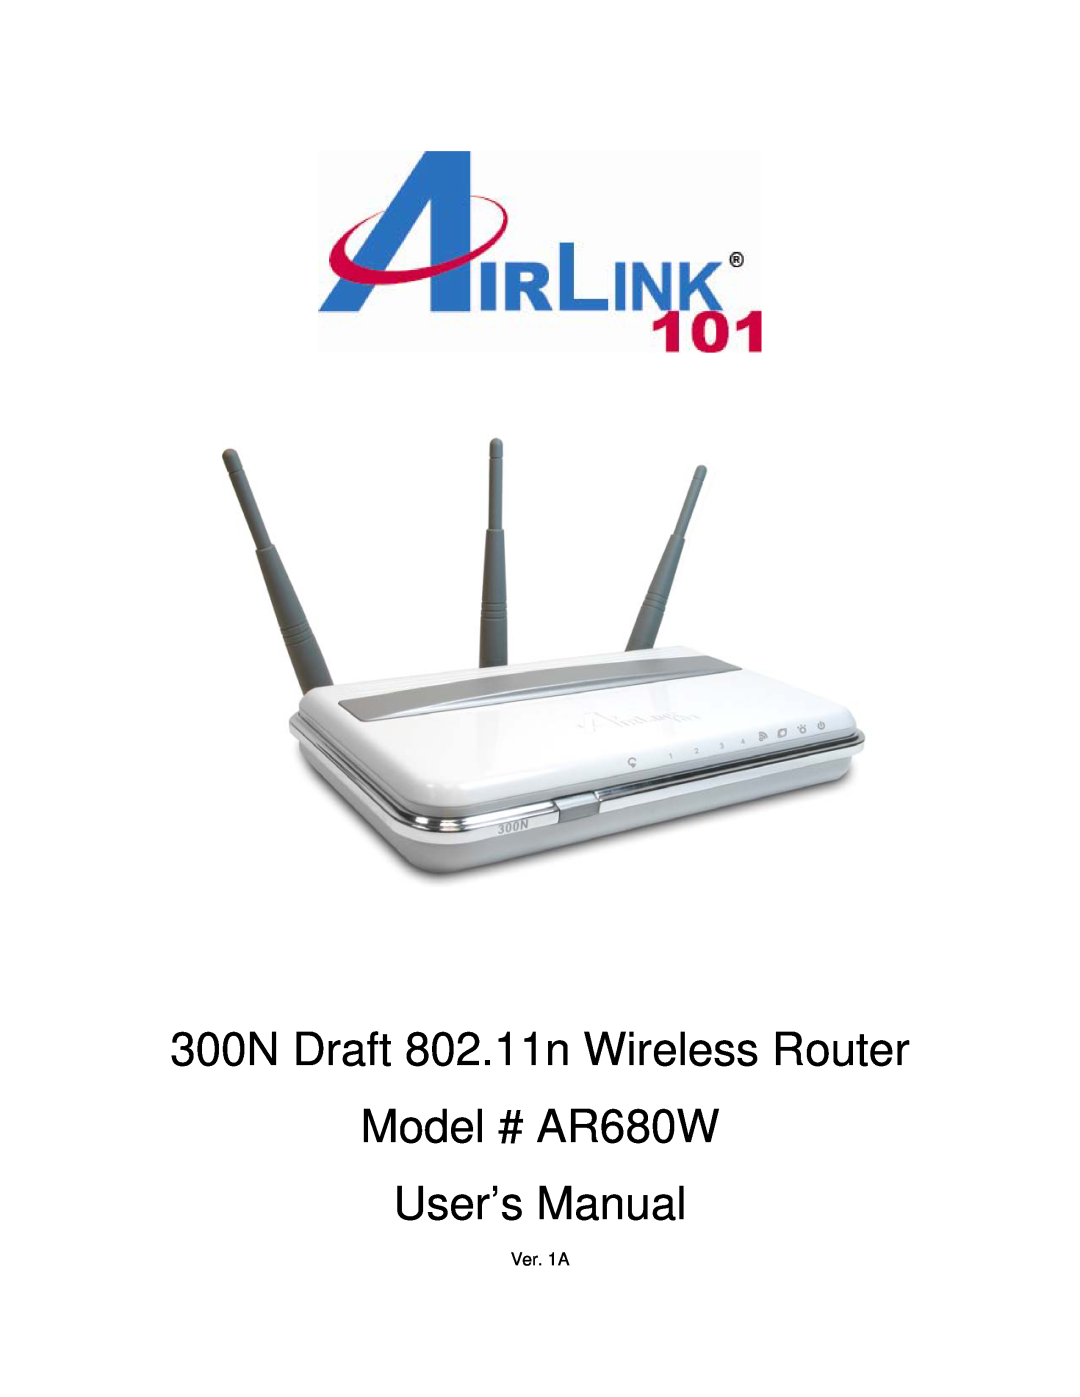 Airlink101 user manual 300N Draft 802.11n Wireless Router, Model # AR680W User’s Manual, Ver. 1A 